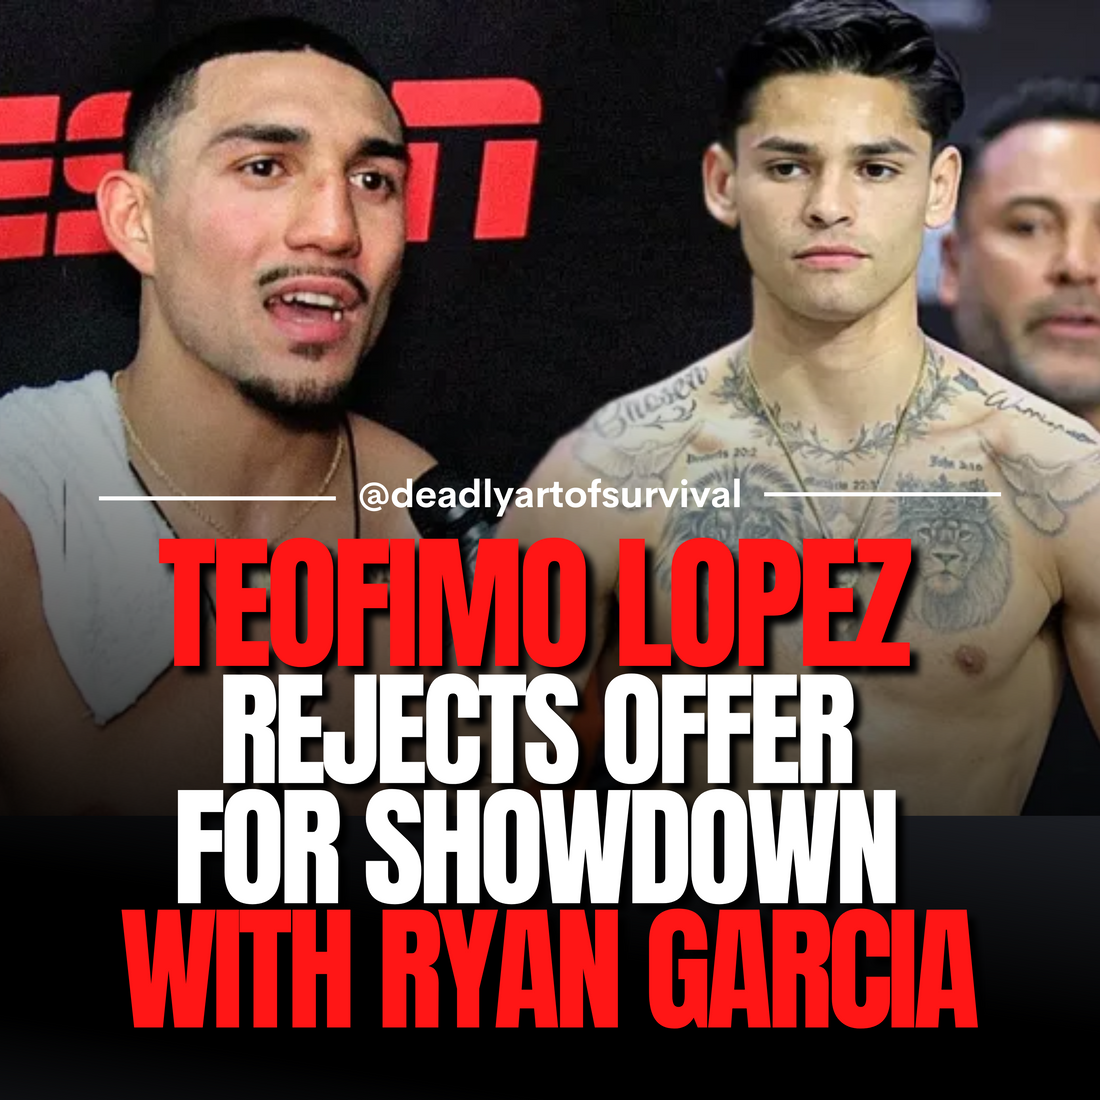 Teofimo Lopez Declines Offer for Showdown with Ryan Garcia